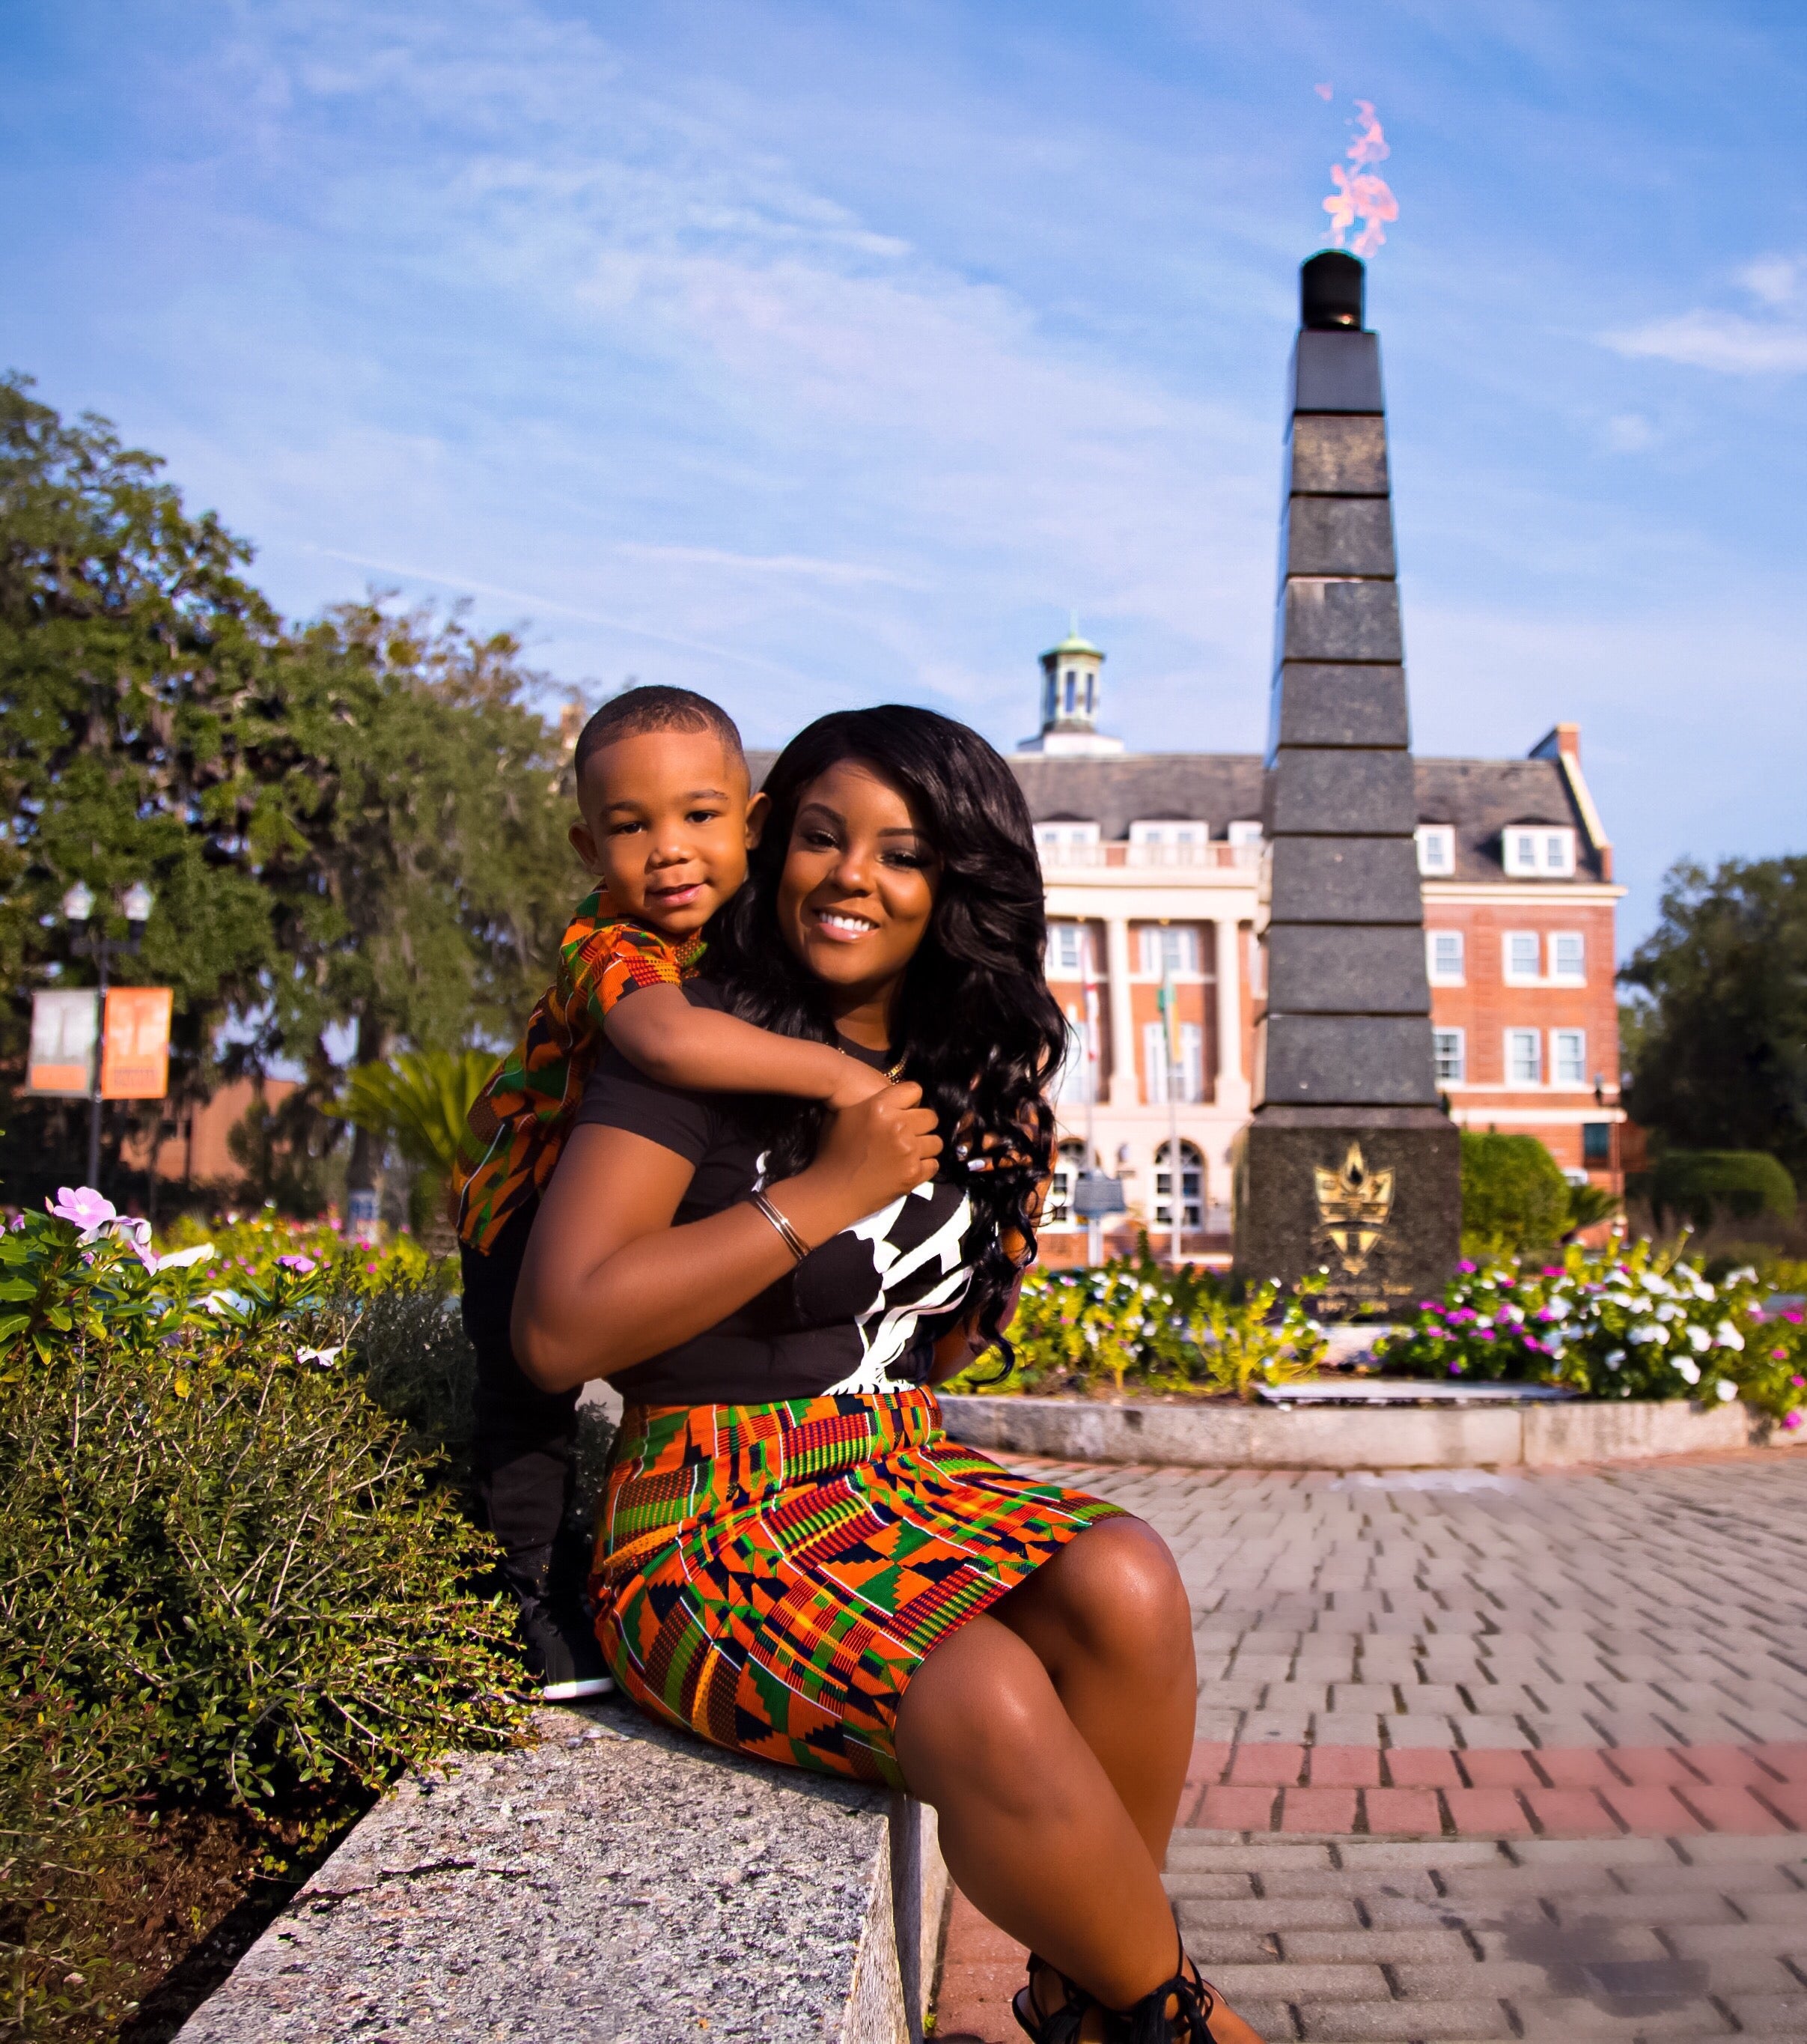 10 Heartfelt Stories From Graduating Black Moms That Will Inspire and Move You
